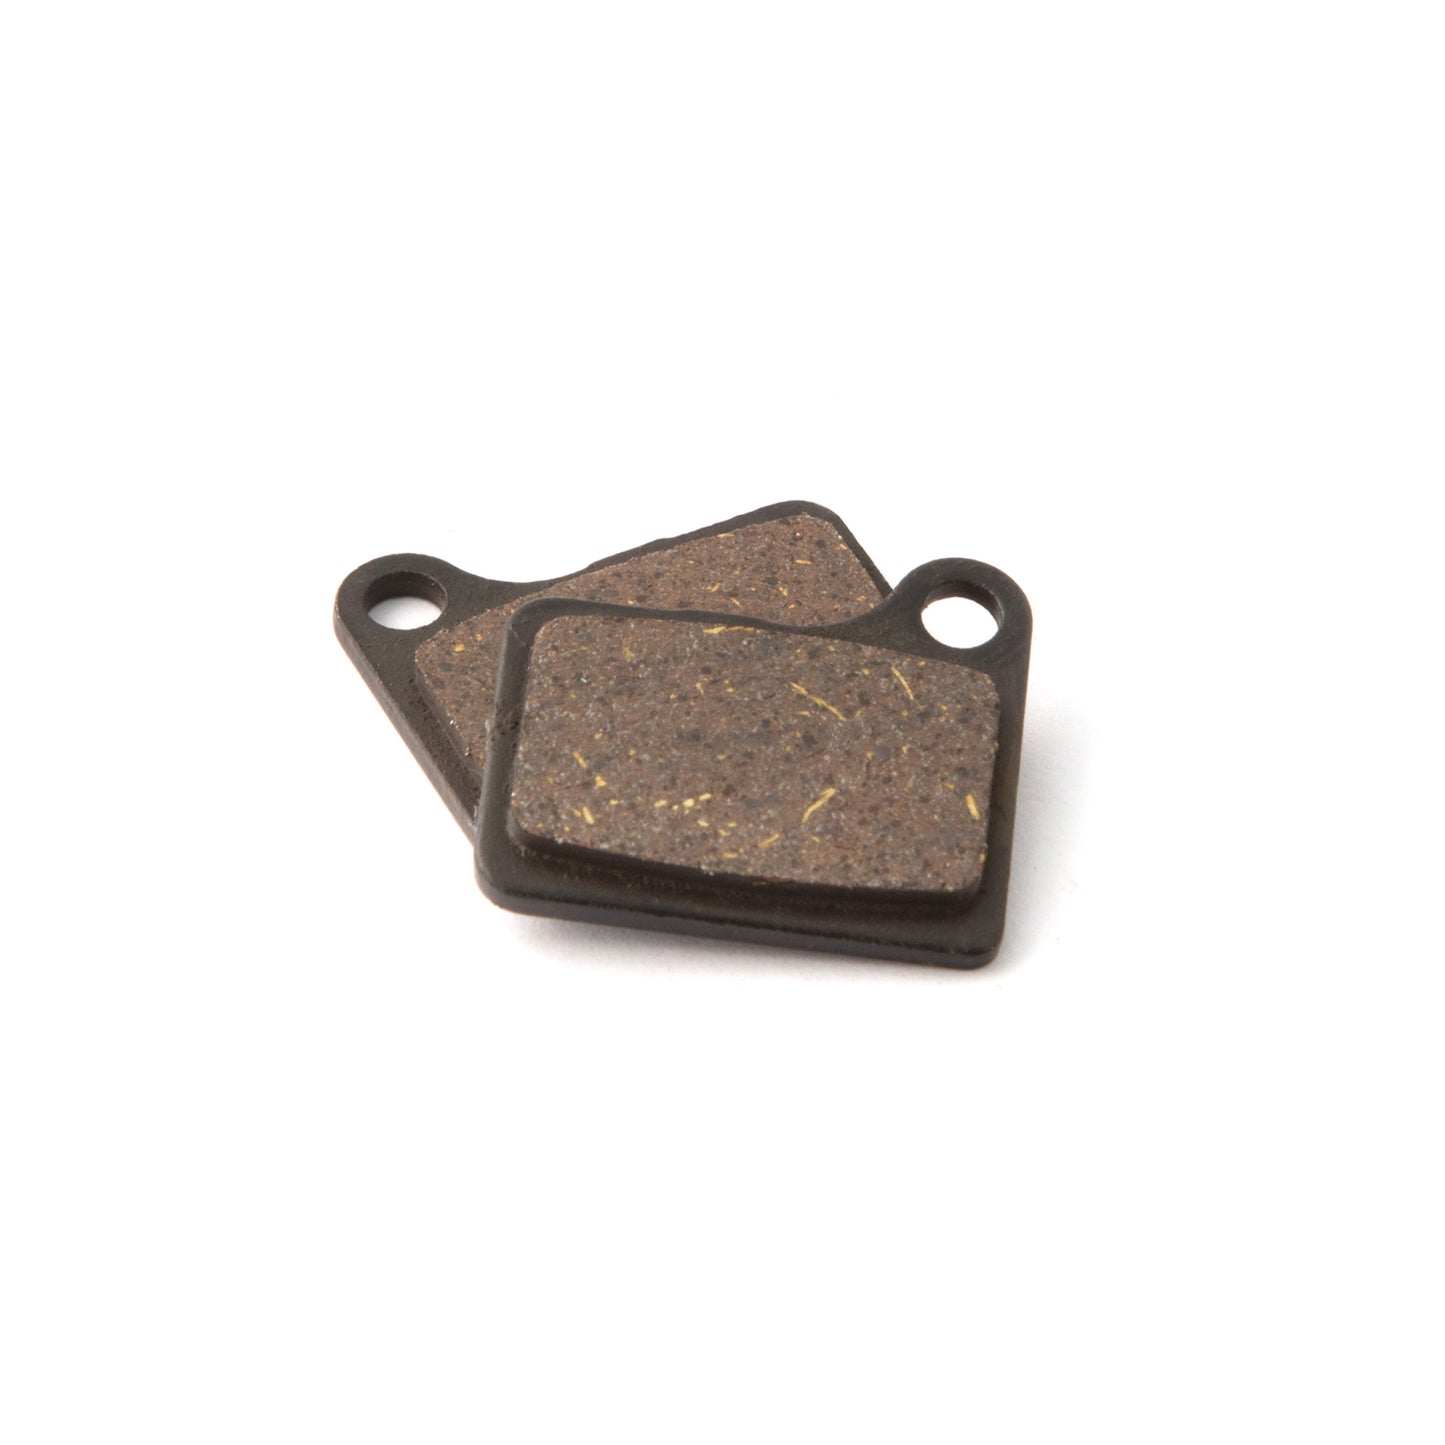 CLARKS SINTERED DISC BRAKE PADS W/CARBON FOR SHIMANO DEORE HYDRAULIC BR-M555/6